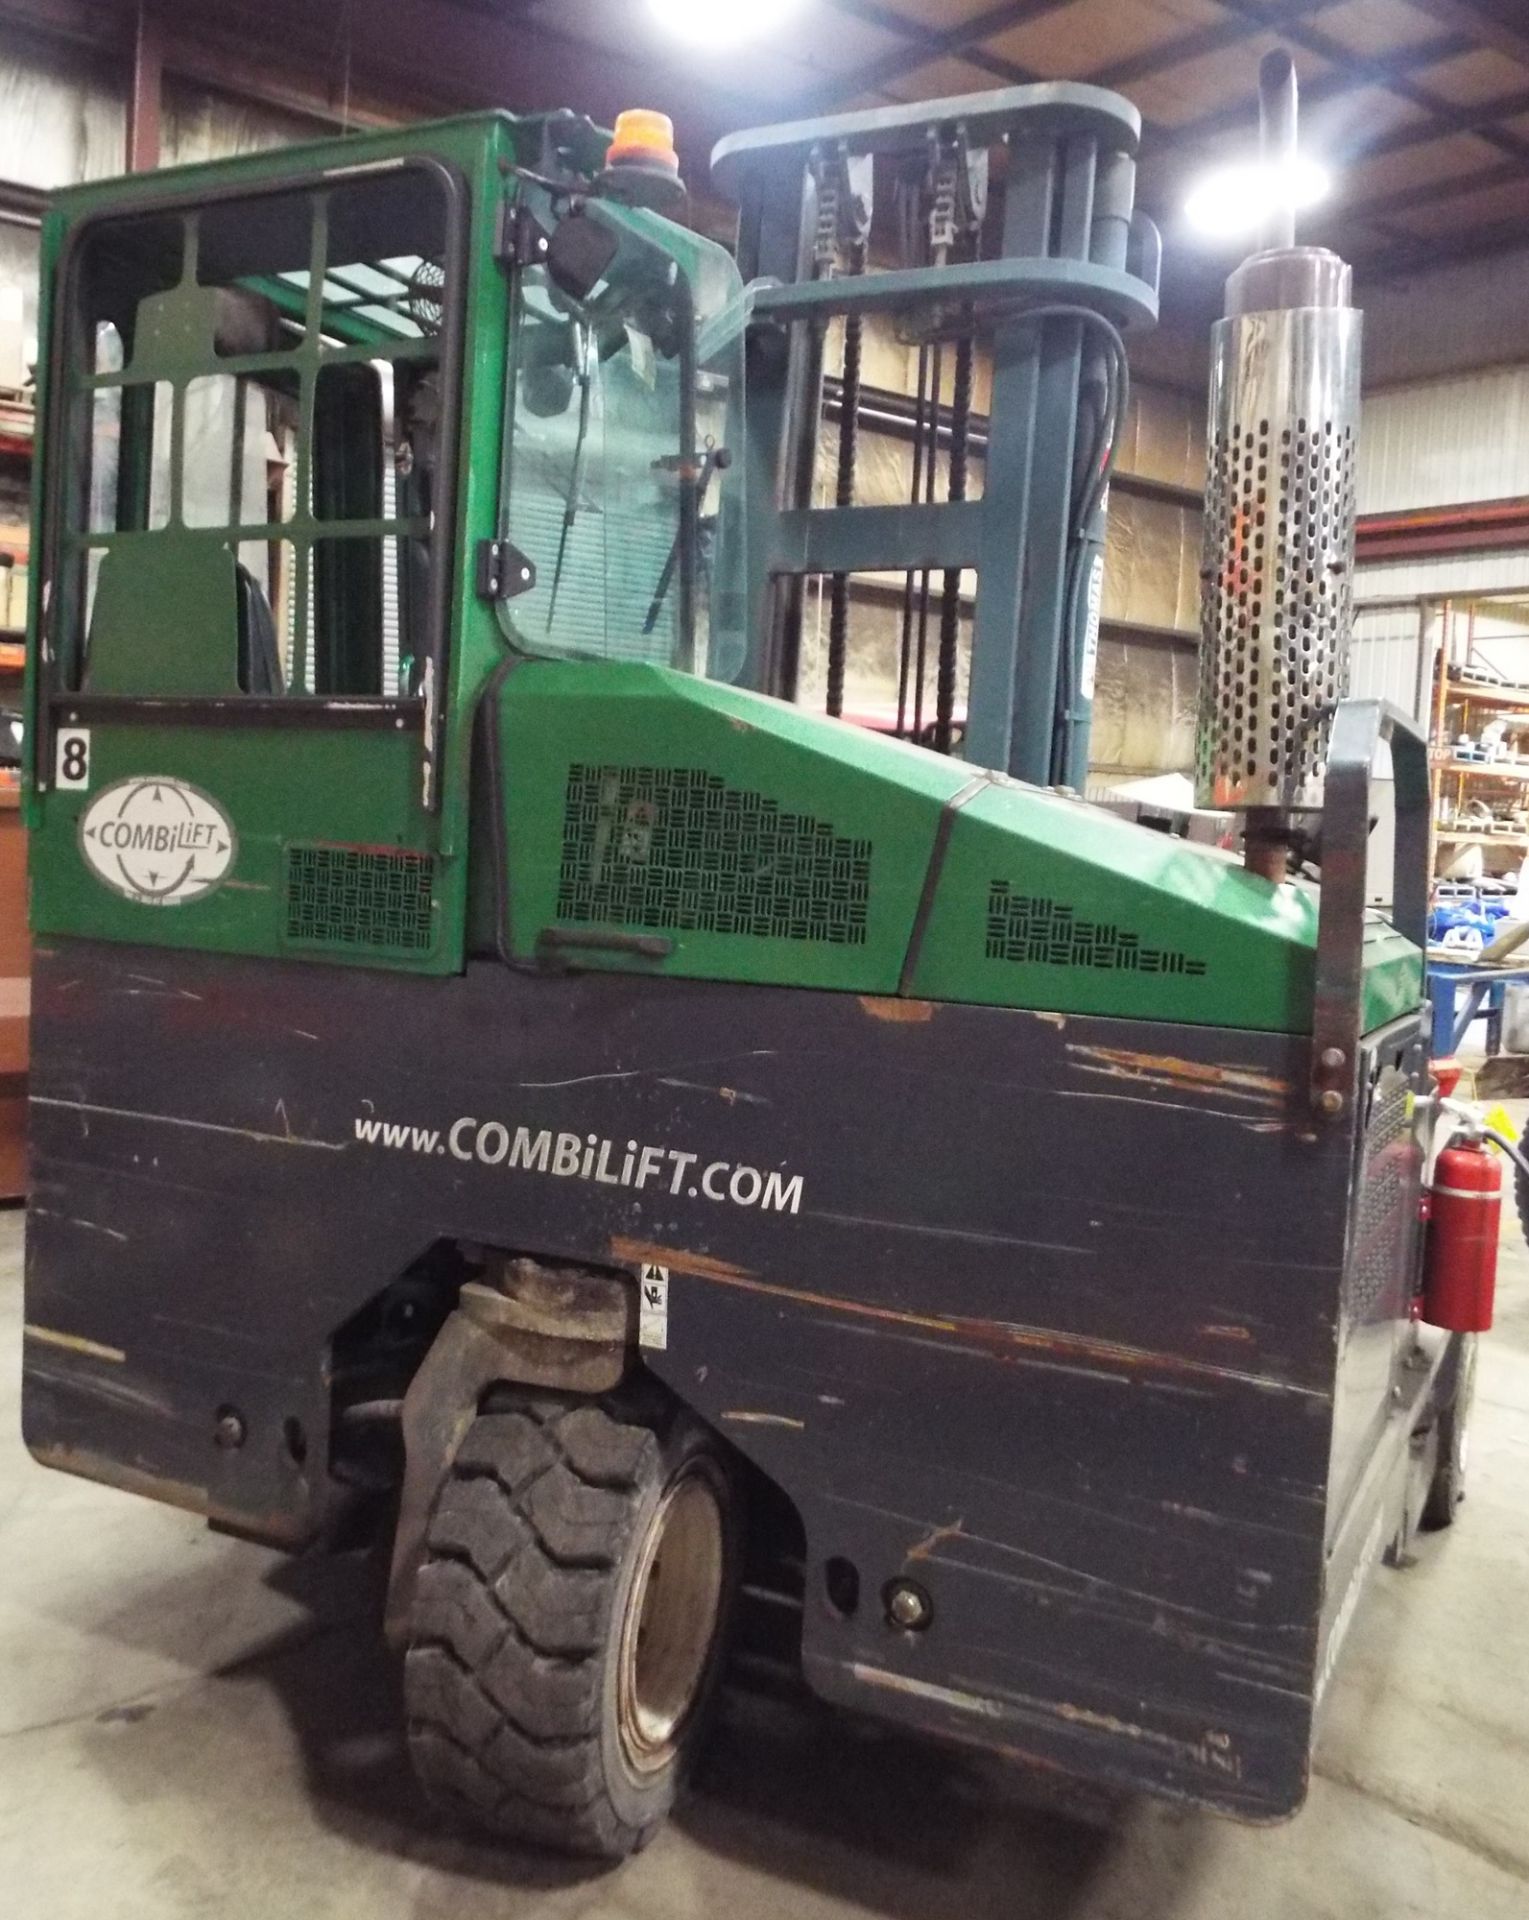 COMBILIFT (2006) CL22100LC48 LPG SIDE LOADER FORKLIFT WITH 10,000 LB. CAPACITY, 168" VERTICAL LIFT, - Image 5 of 10